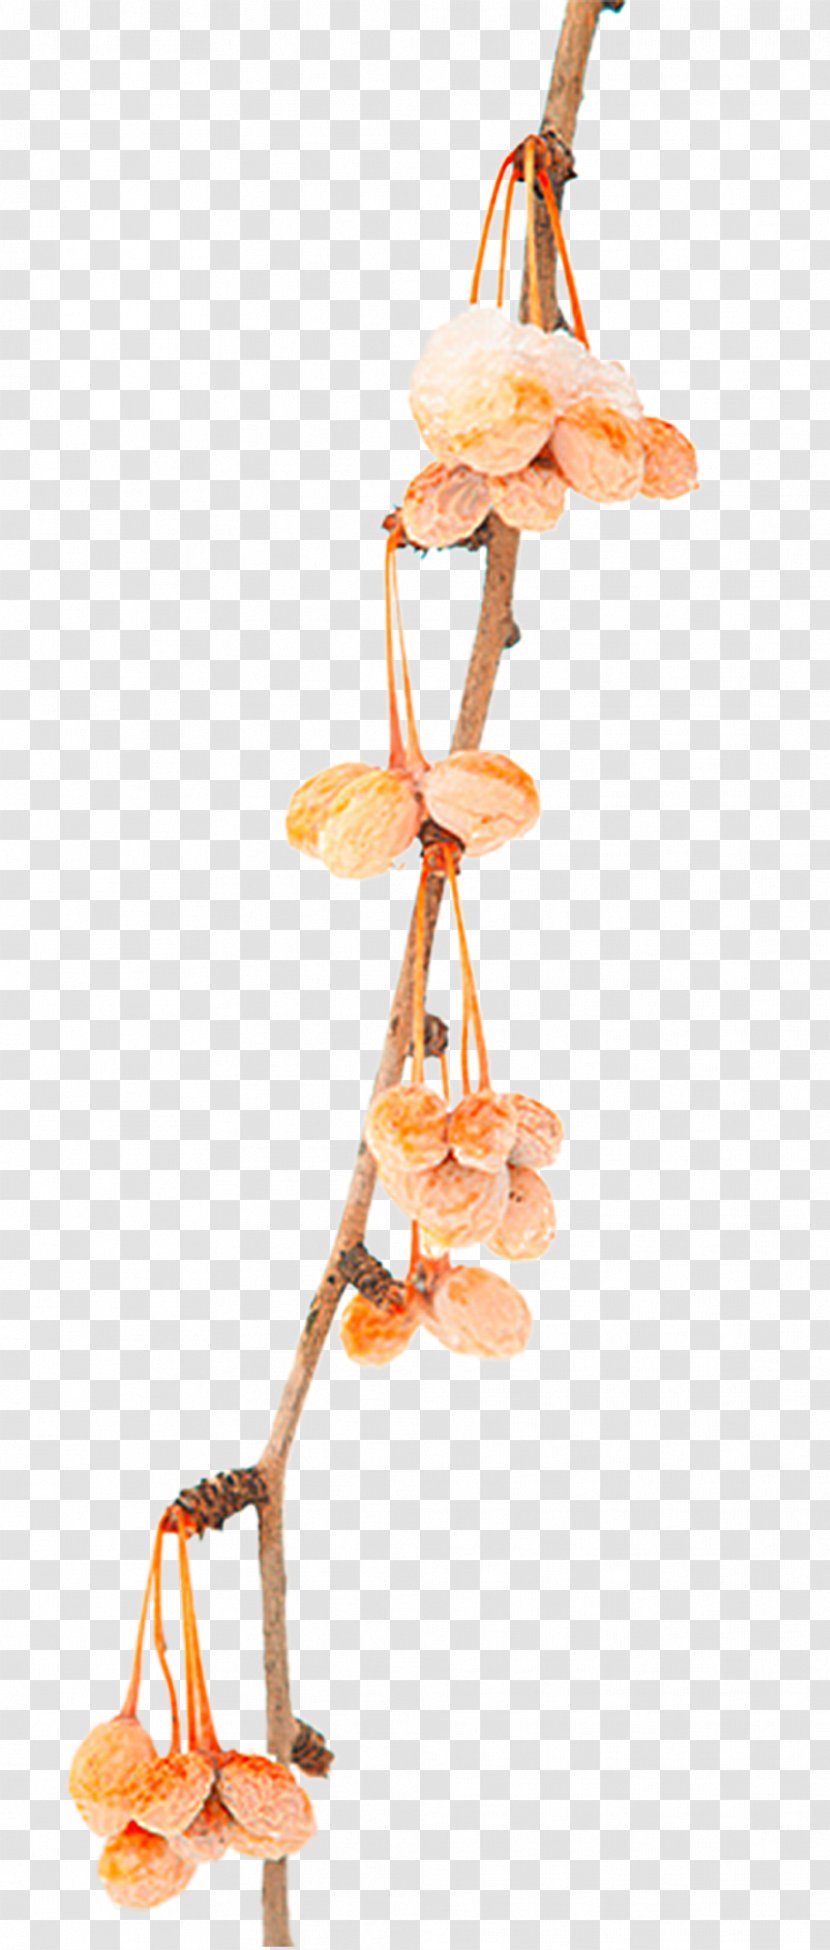 Download - Orange - A Snow-covered Withered Ginkgo Fruit Transparent PNG